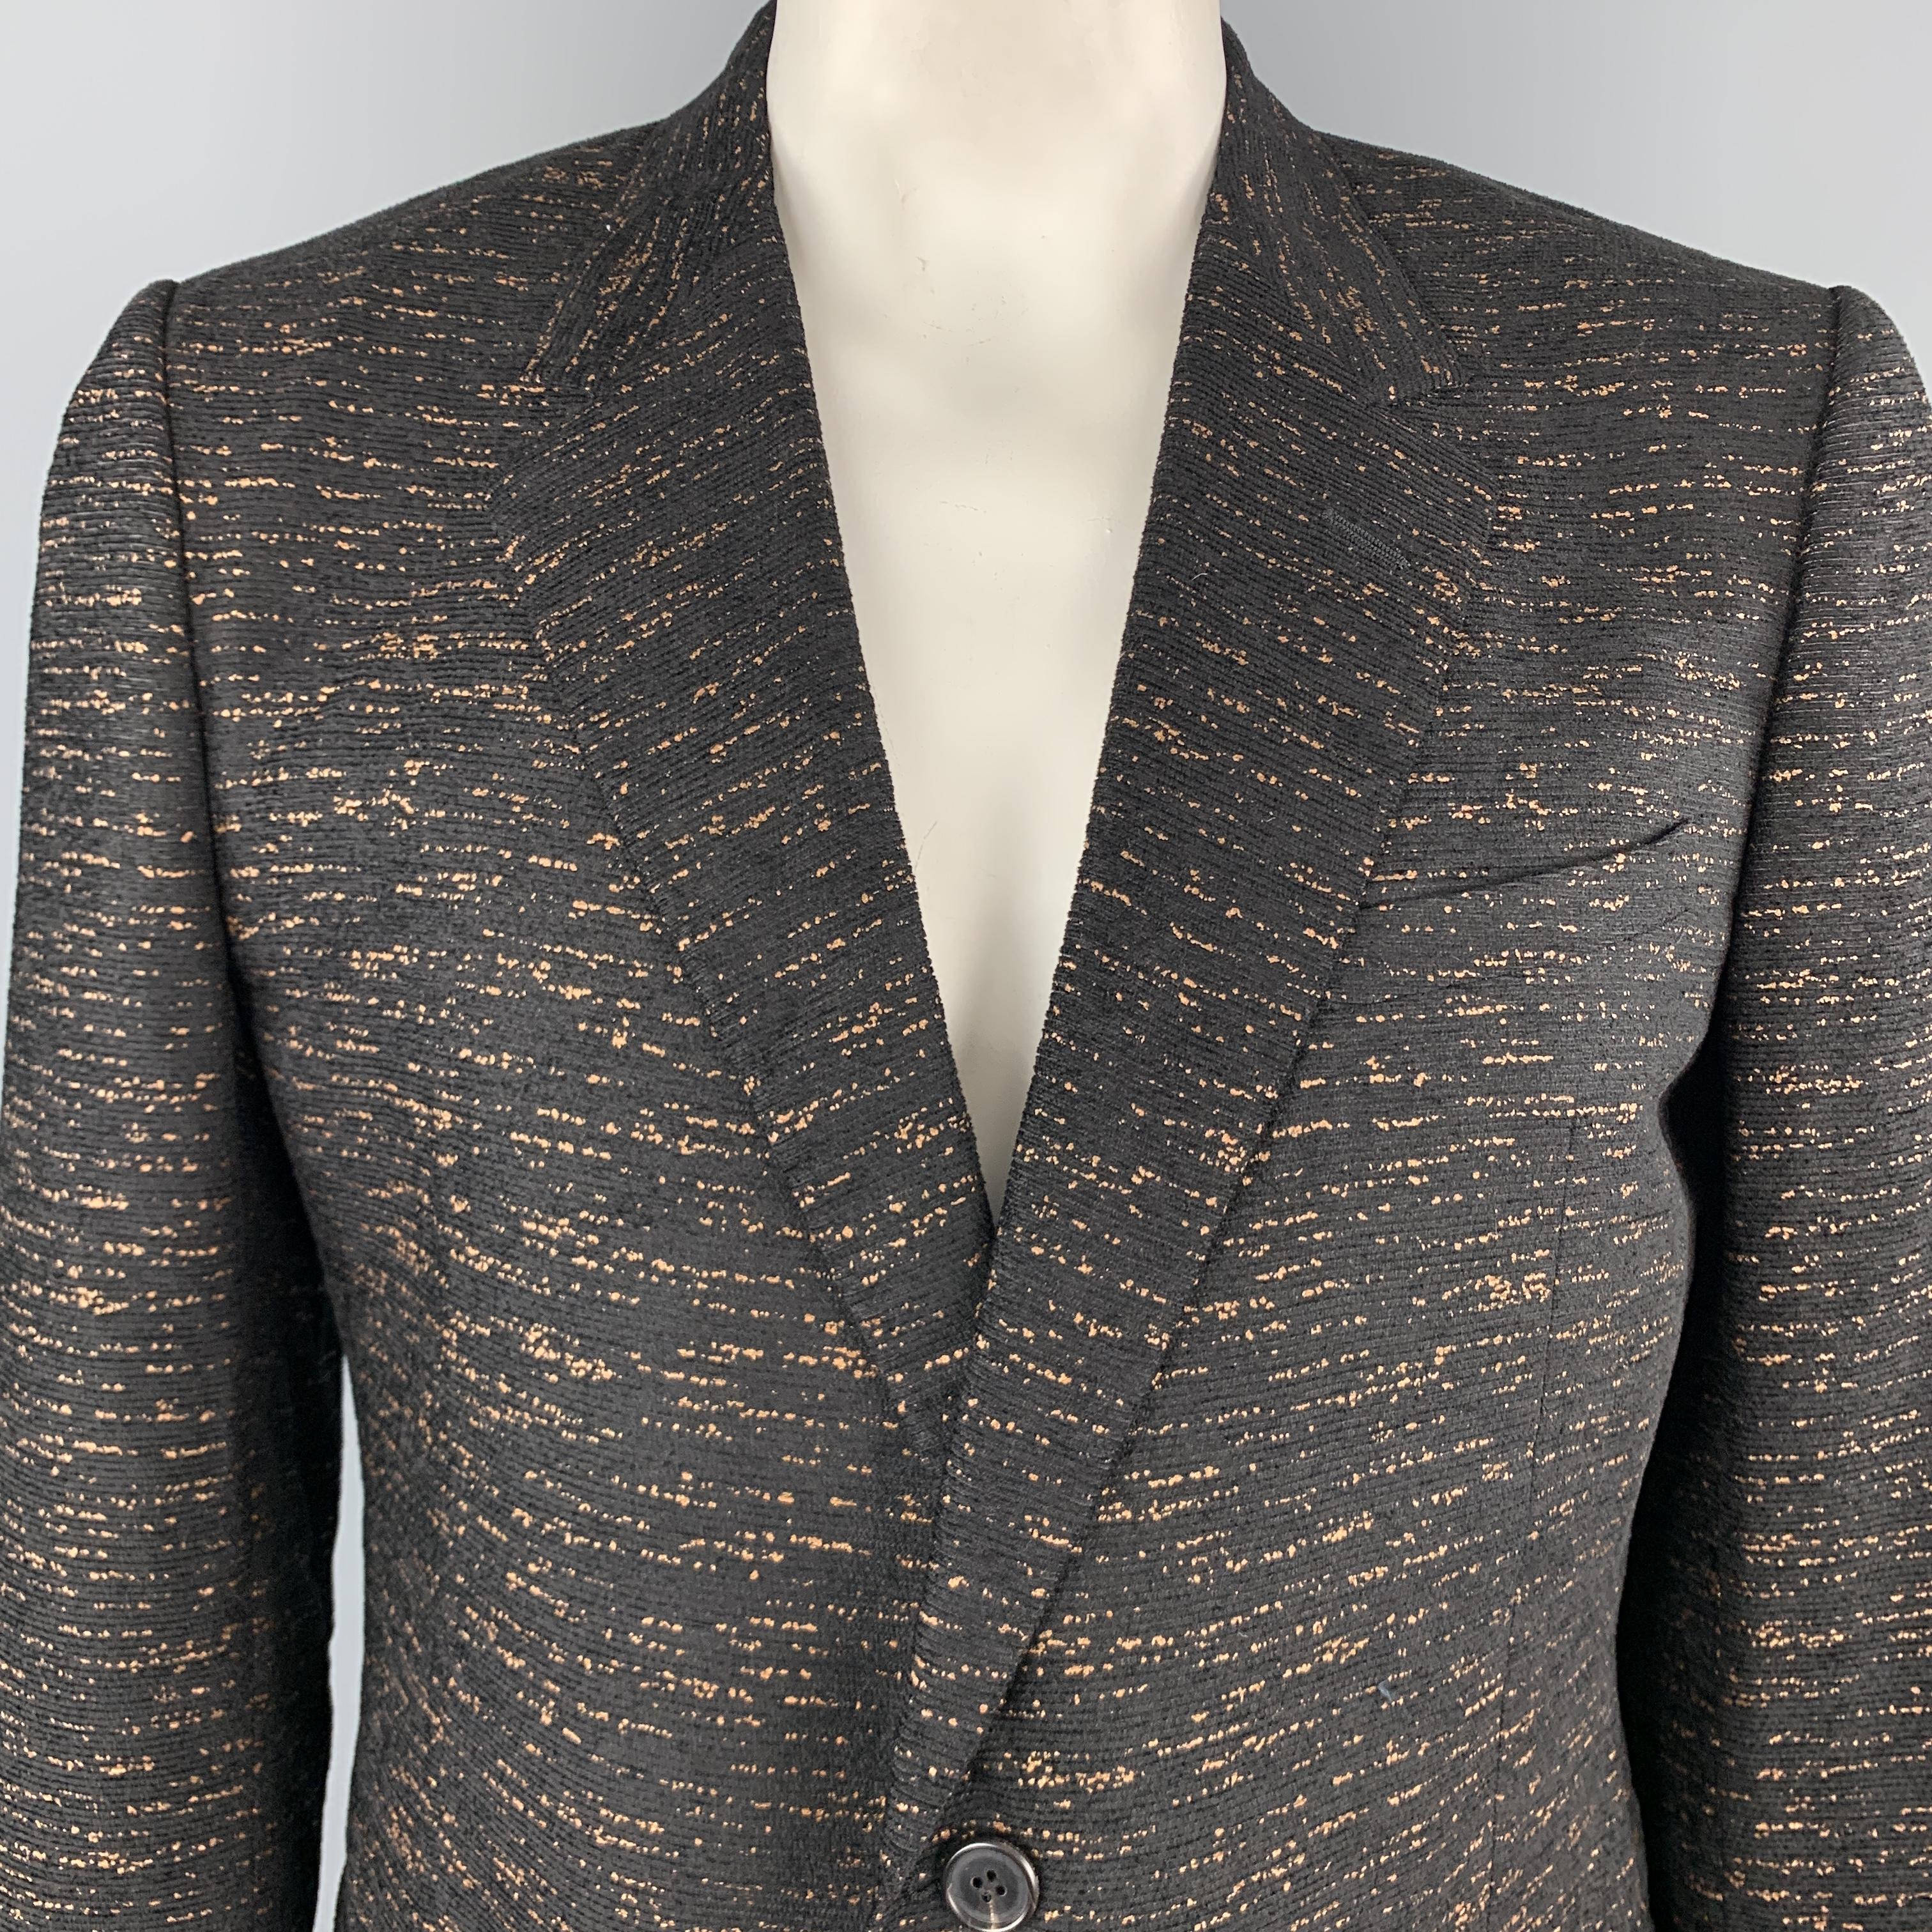 LANVIN sport coat comes in a unique ribbed textured black fabric with an all over copper orange heathered effect, notch lapel, and single breasted two button front. Made in Italy.

New with Tags.
Marked: IT 56

Measurements:

Shoulder: 18.5